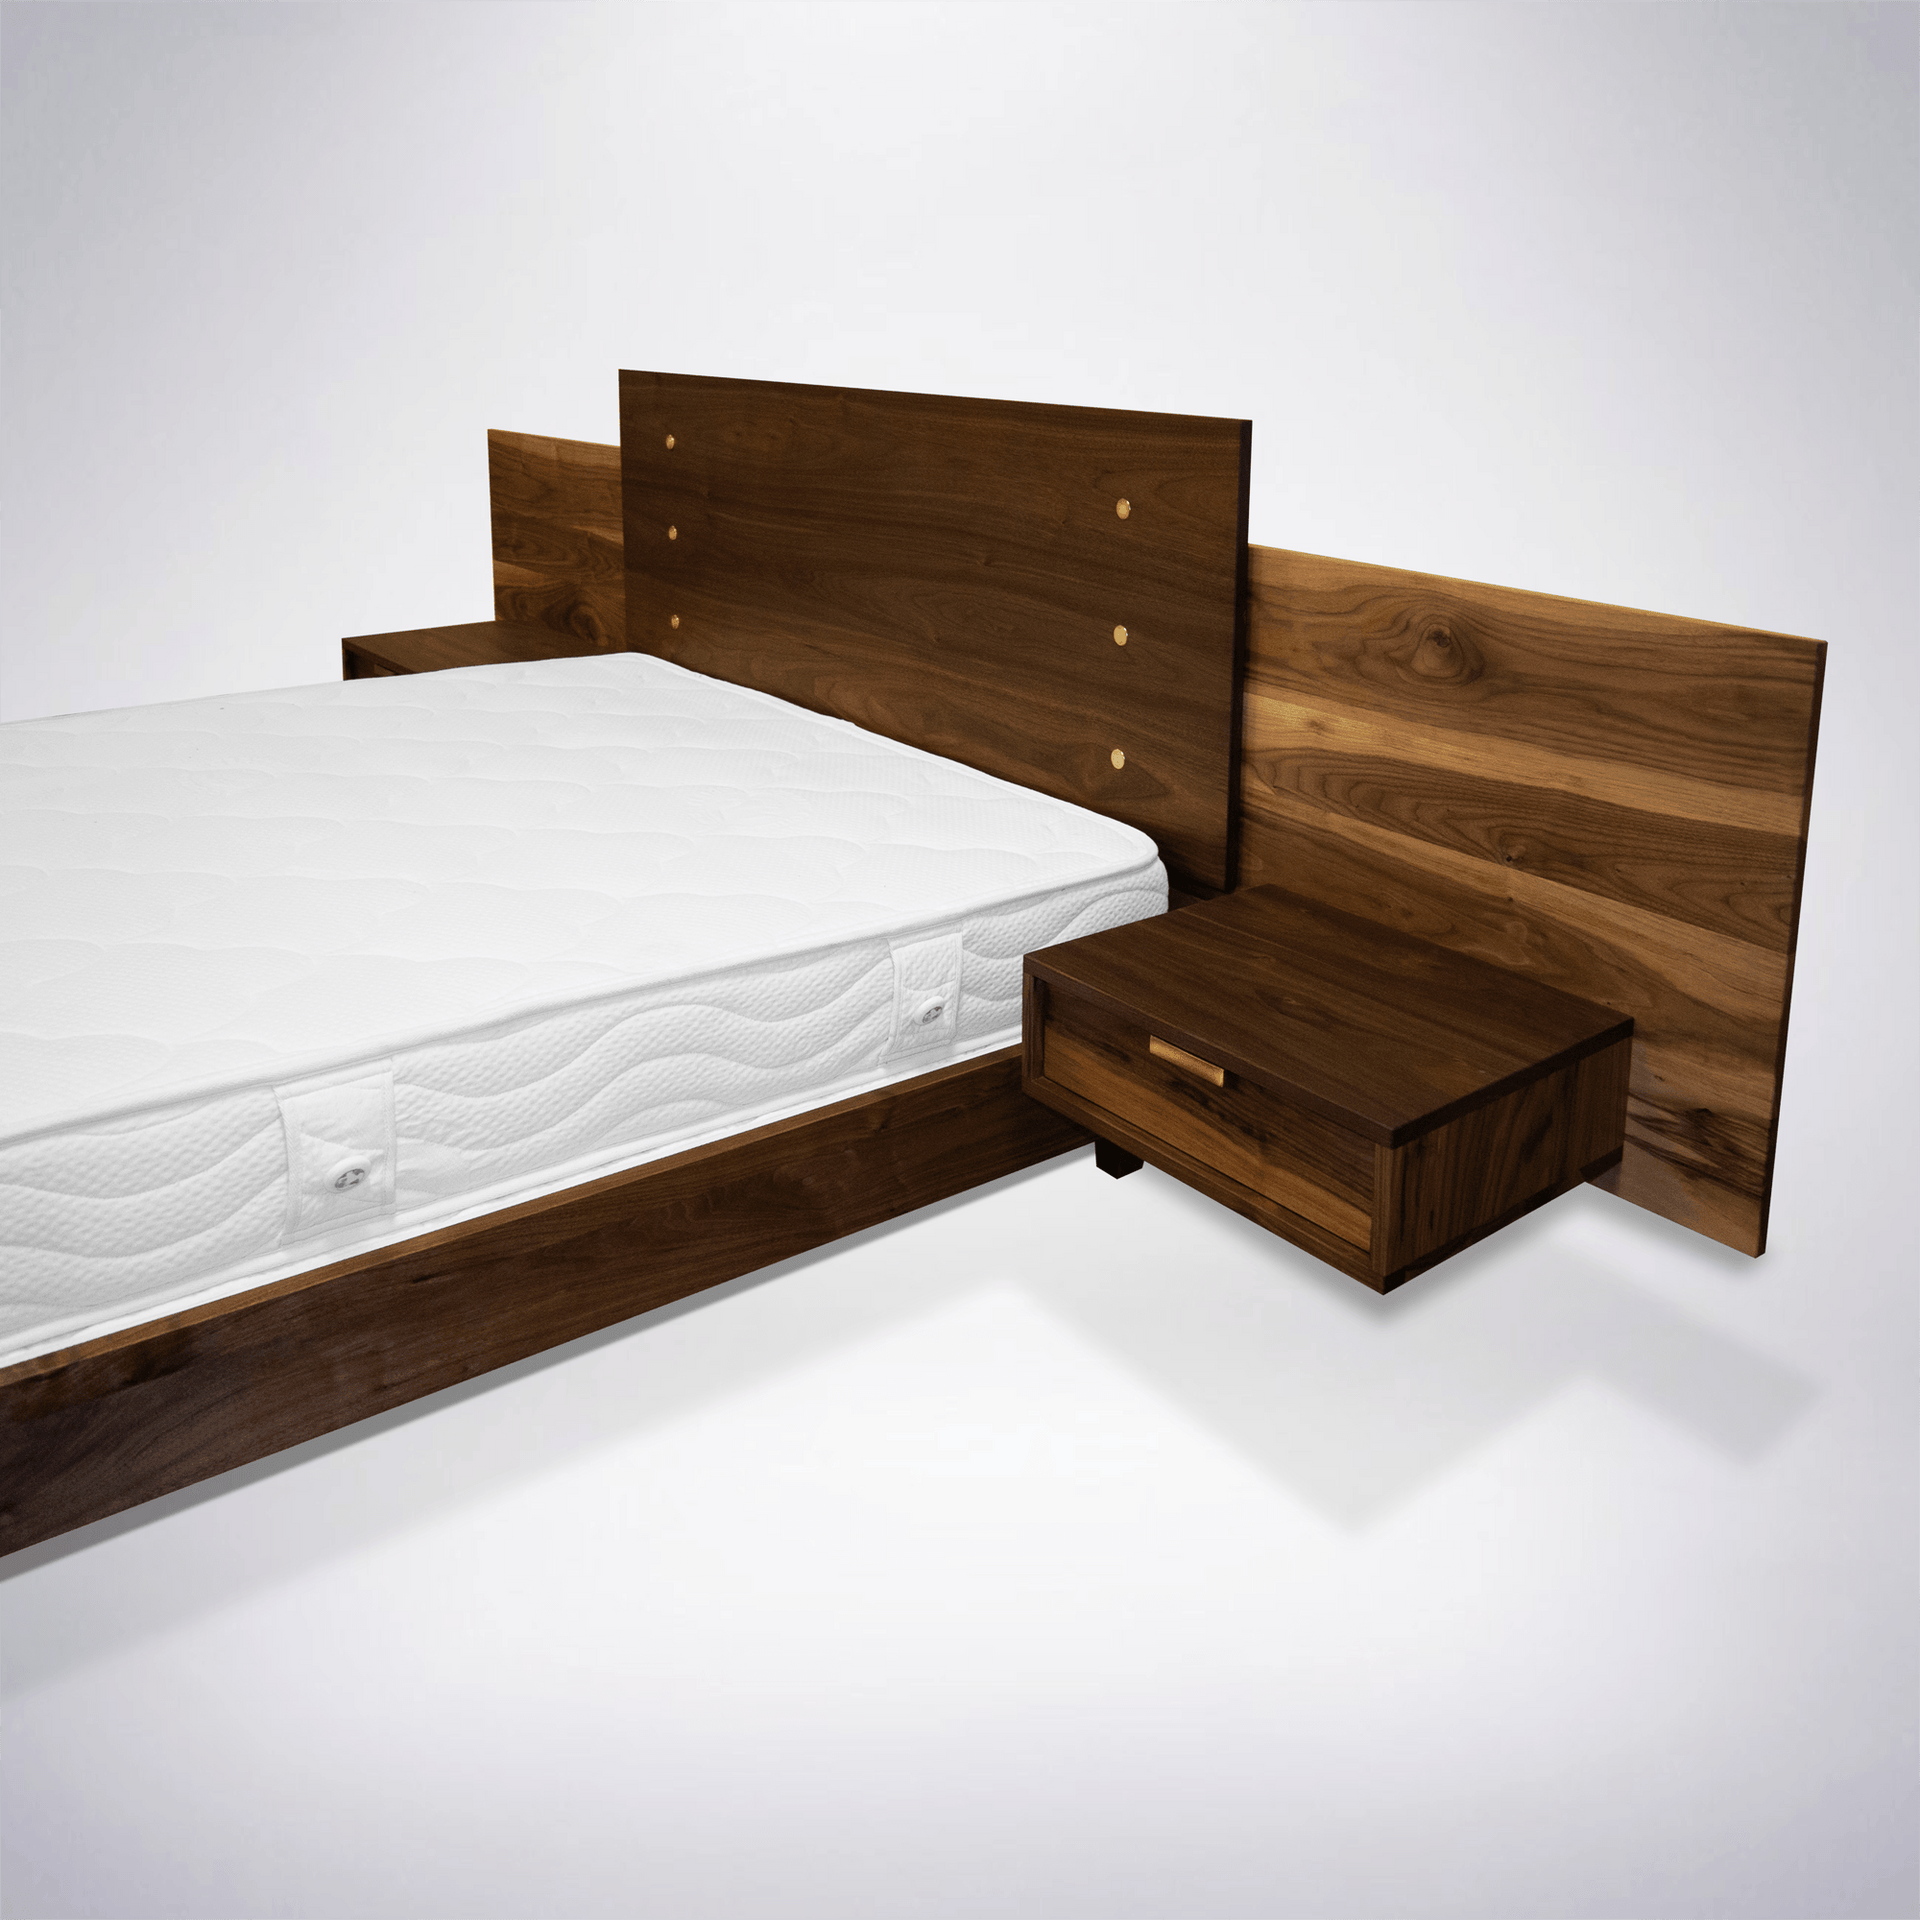 Close up of the solid wood bedframe, handcrafted in Columbus, Ohio